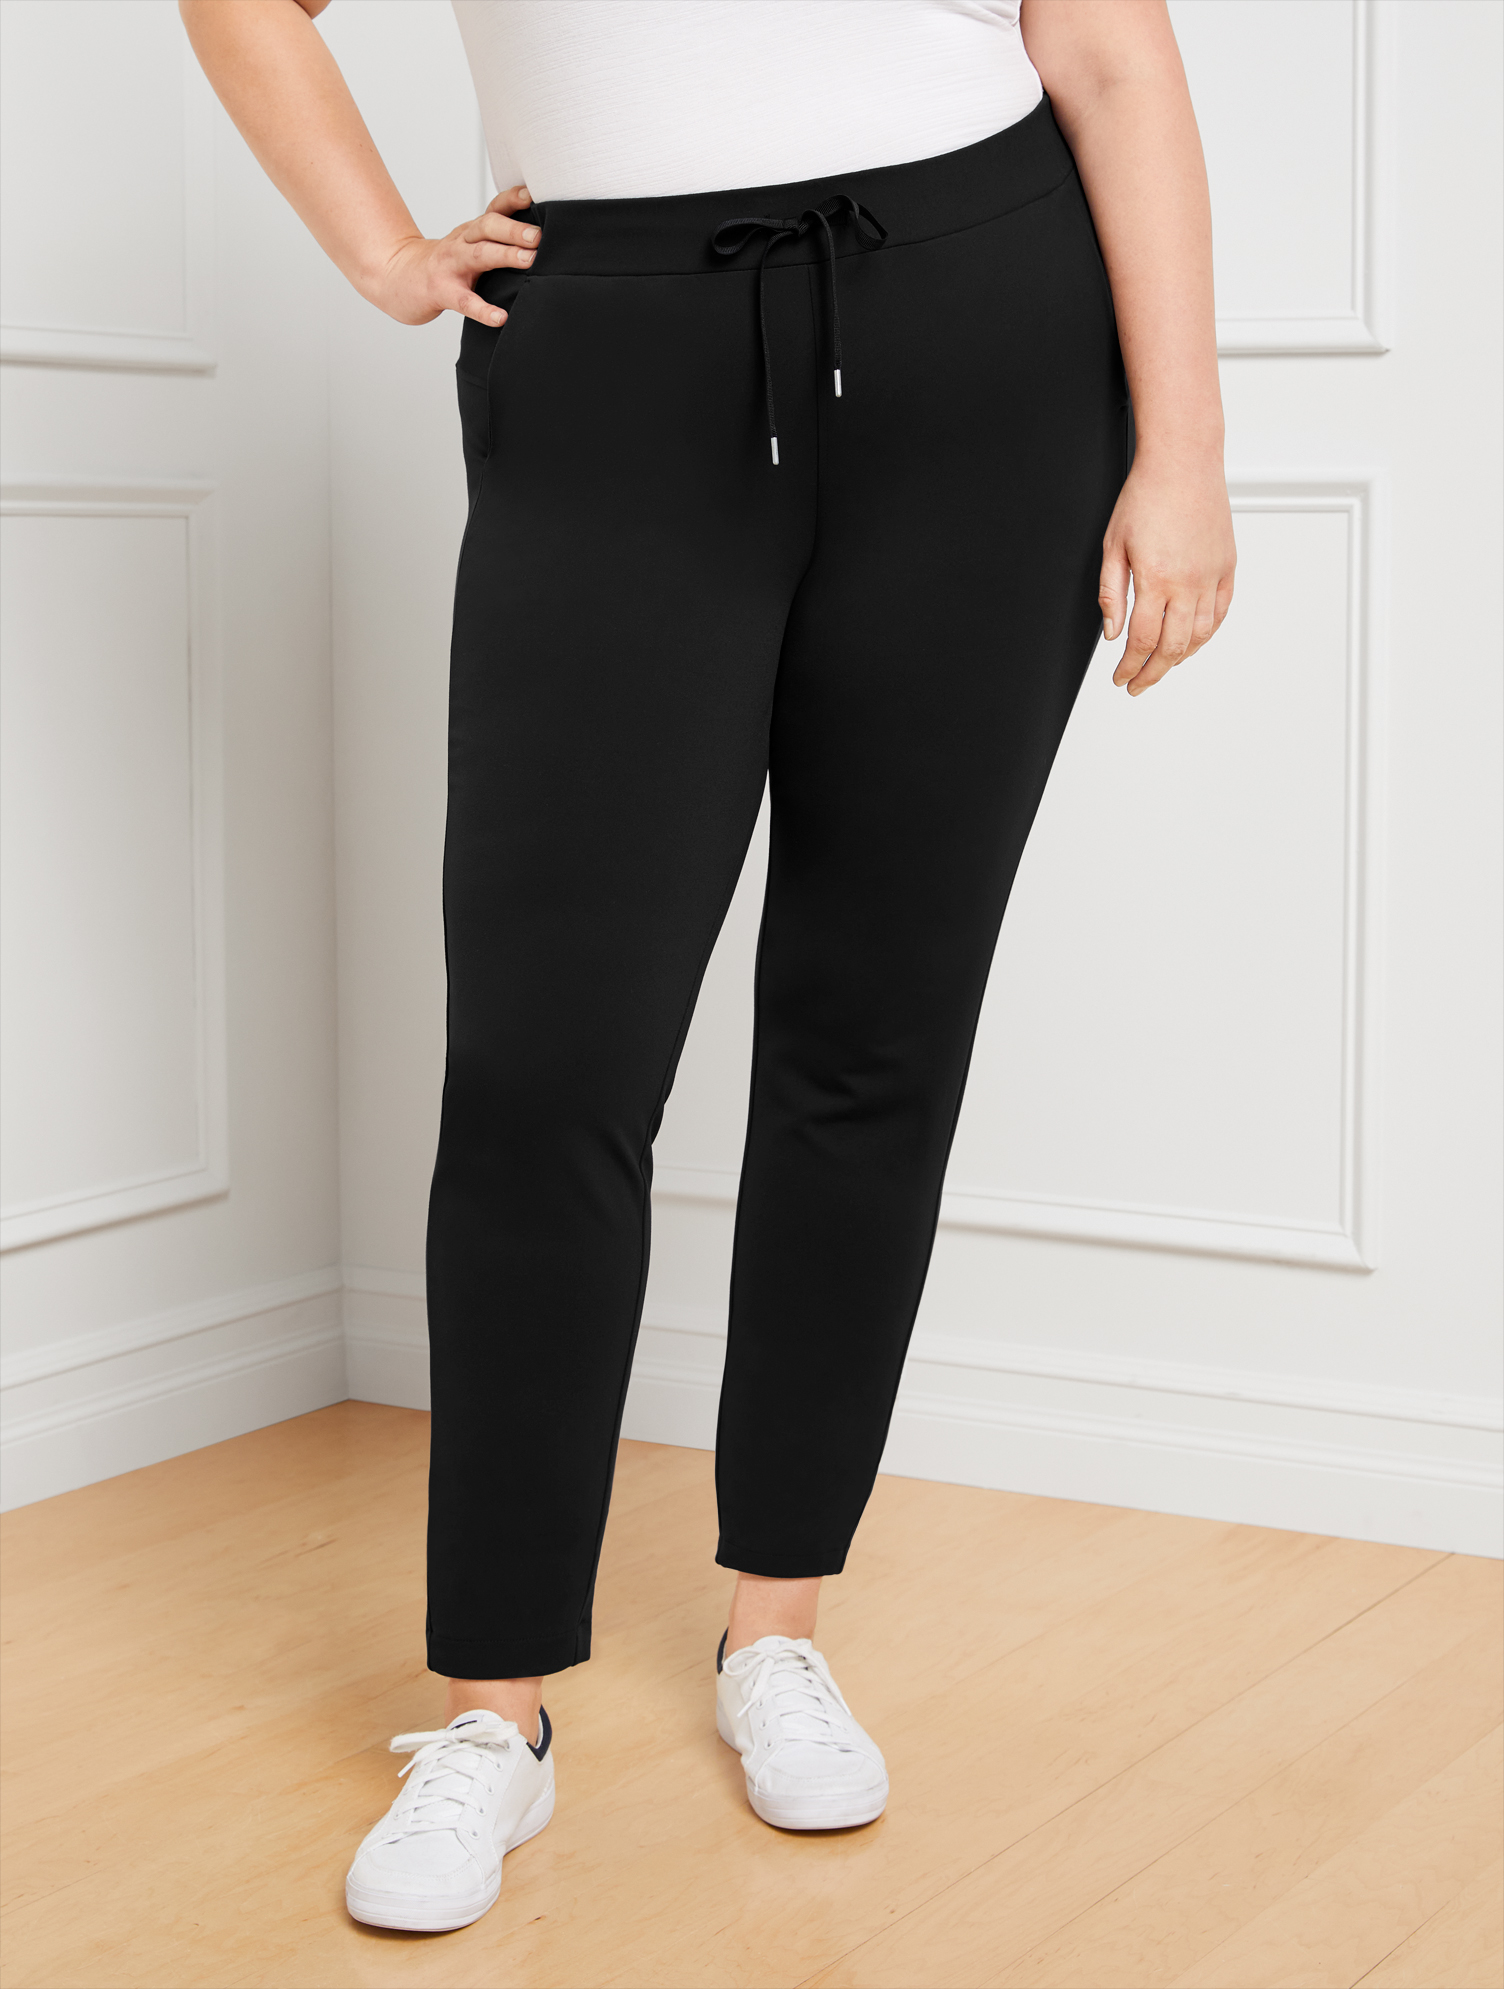 Talbots Out & About Stretch Jogger Pants - Black - 3x